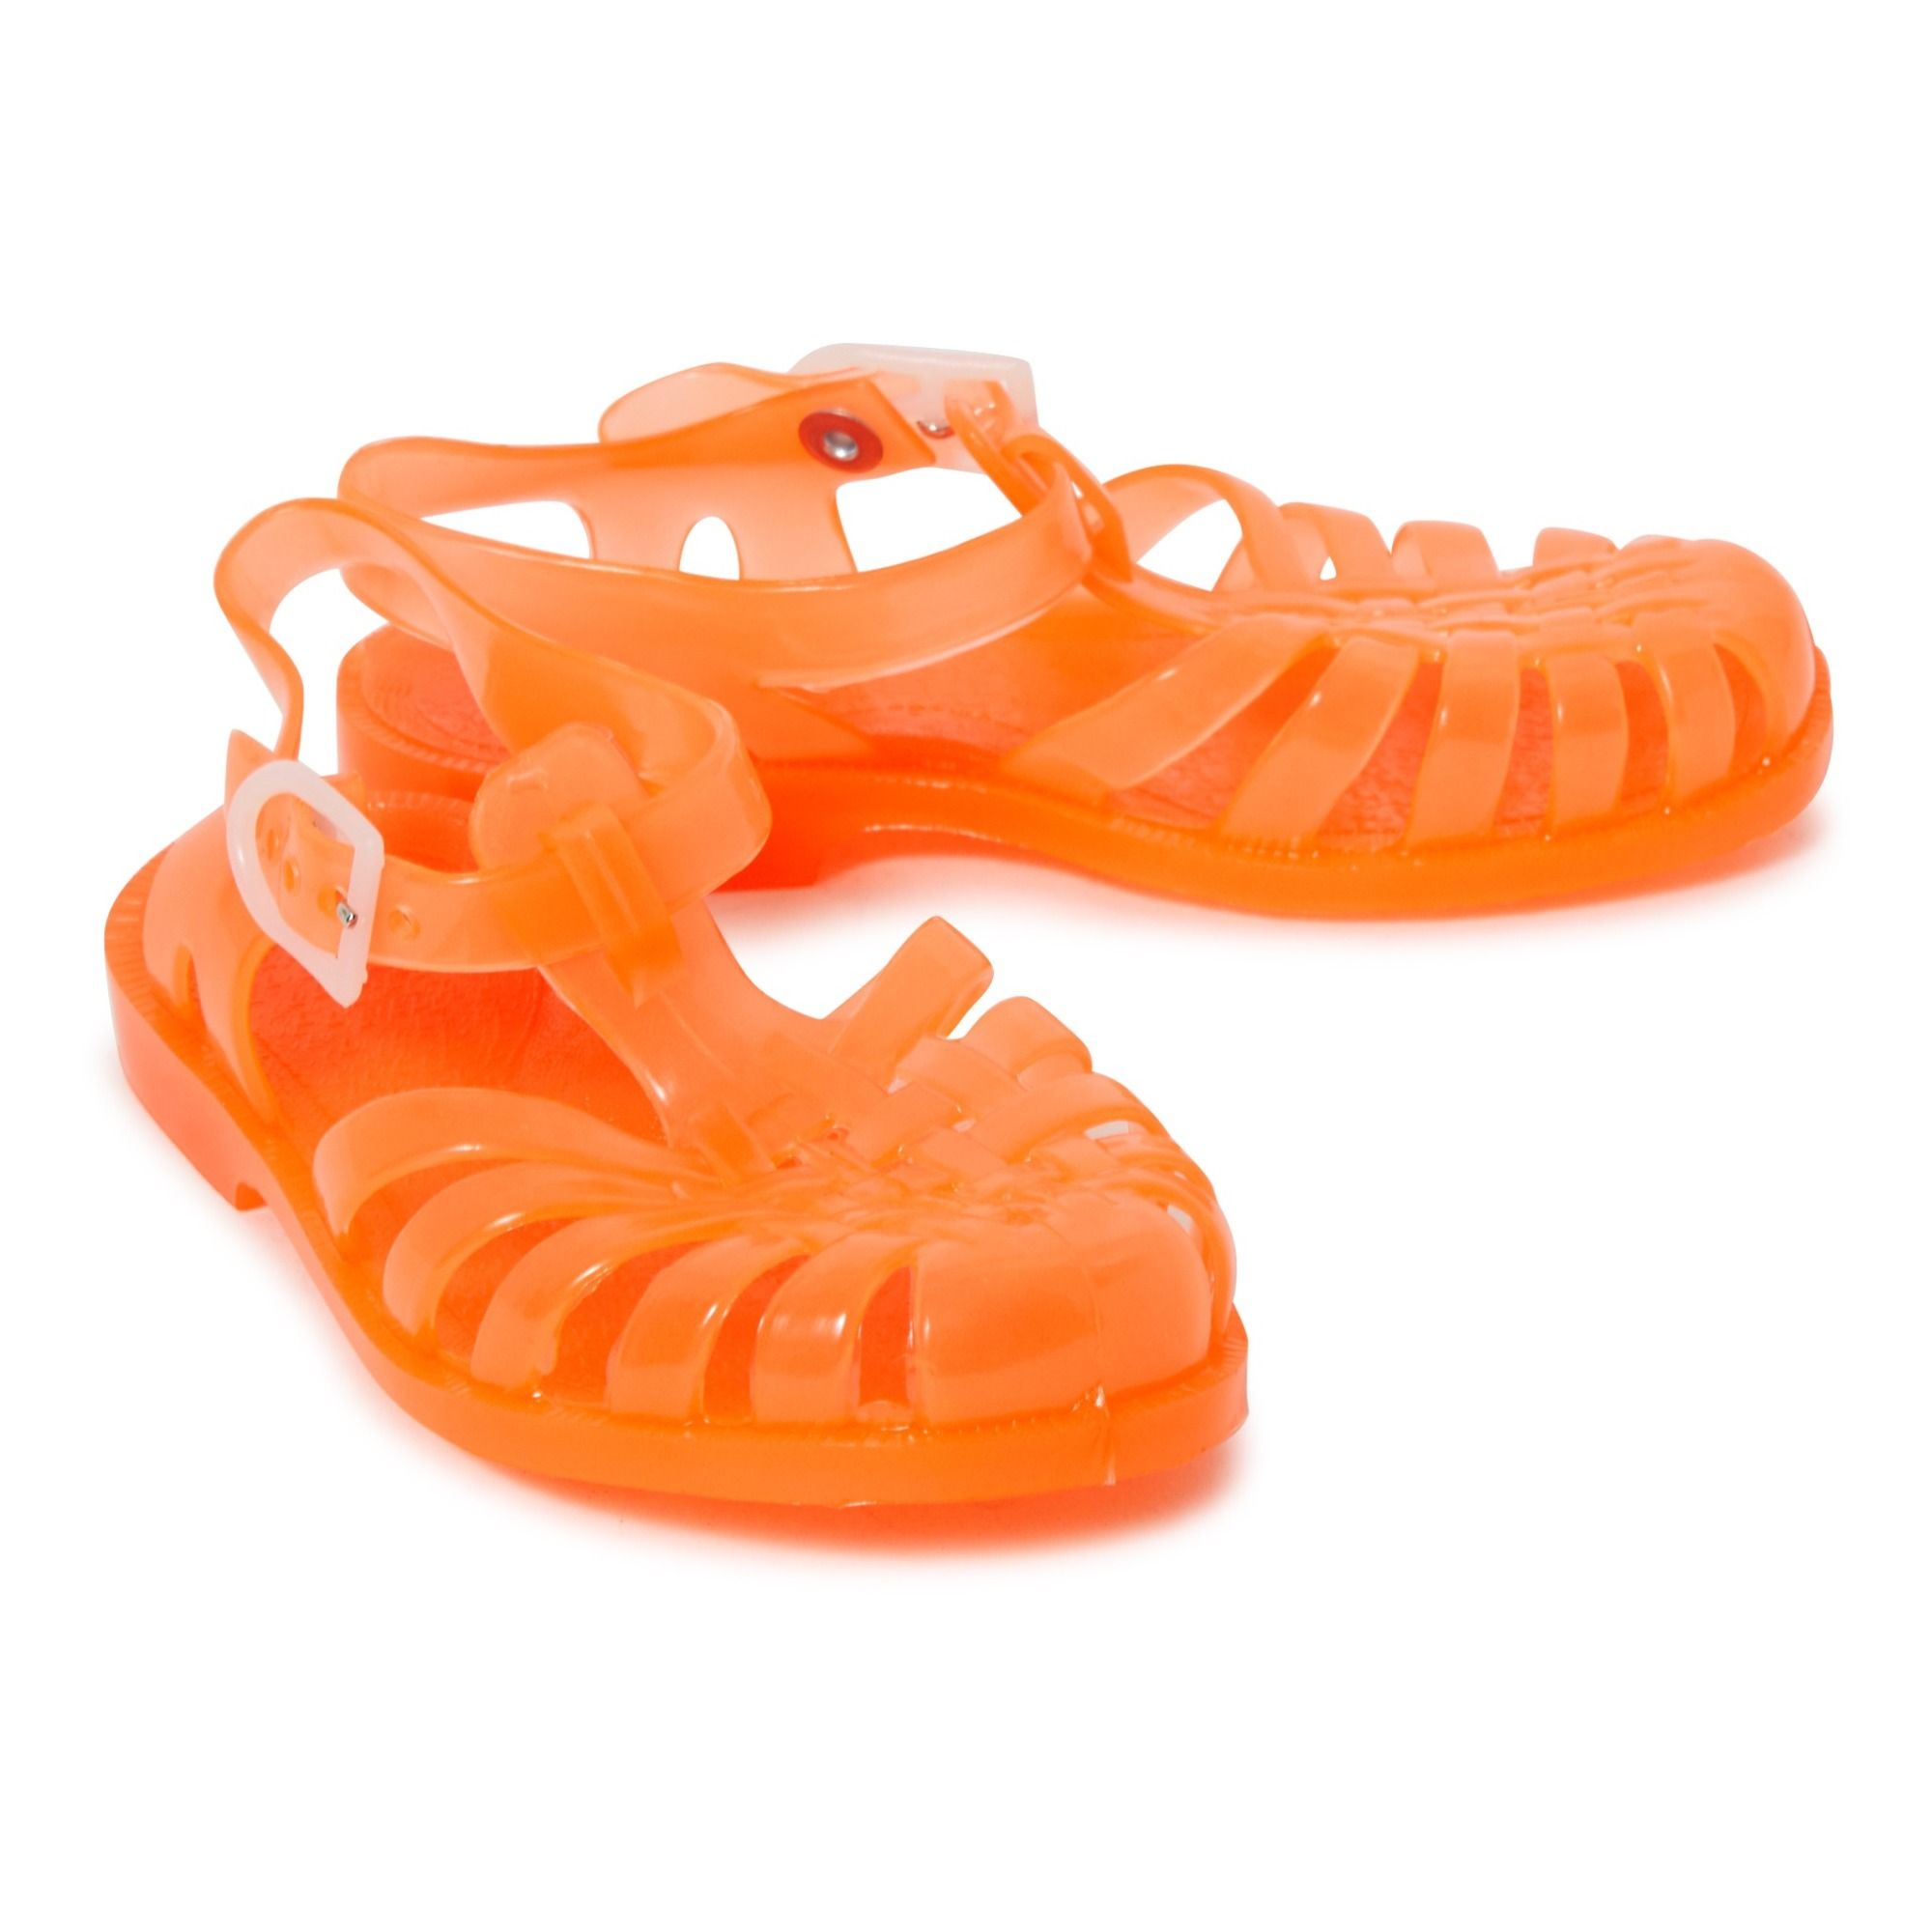 Sunlight Phosphorescent Jelly Shoes Coral Meduse Shoes Baby